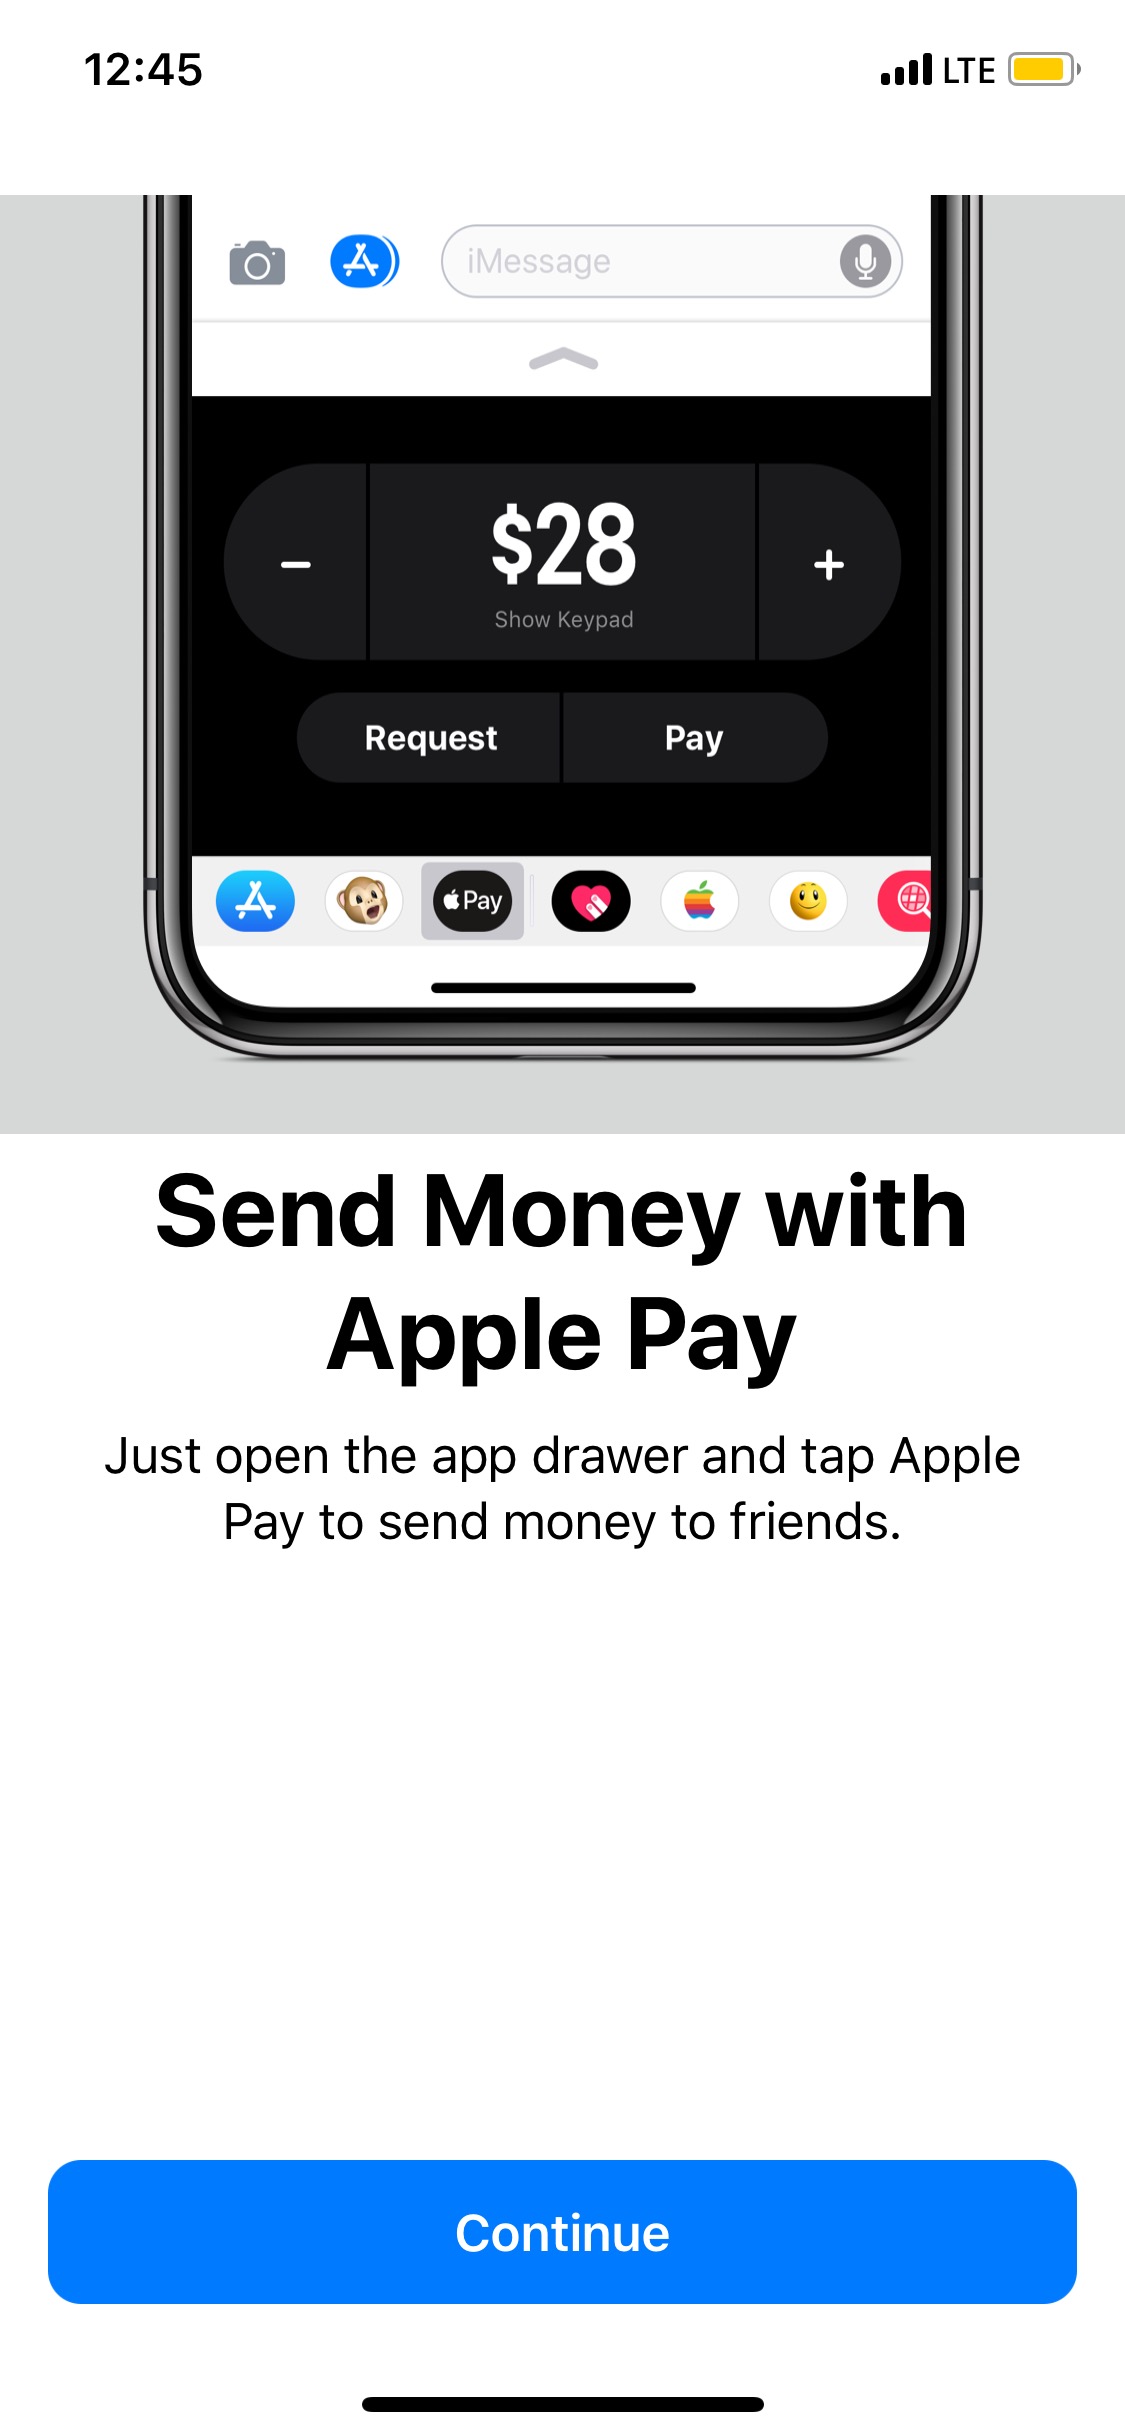 Apple Pay Cash Now Available in iOS 11.2 Beta 2